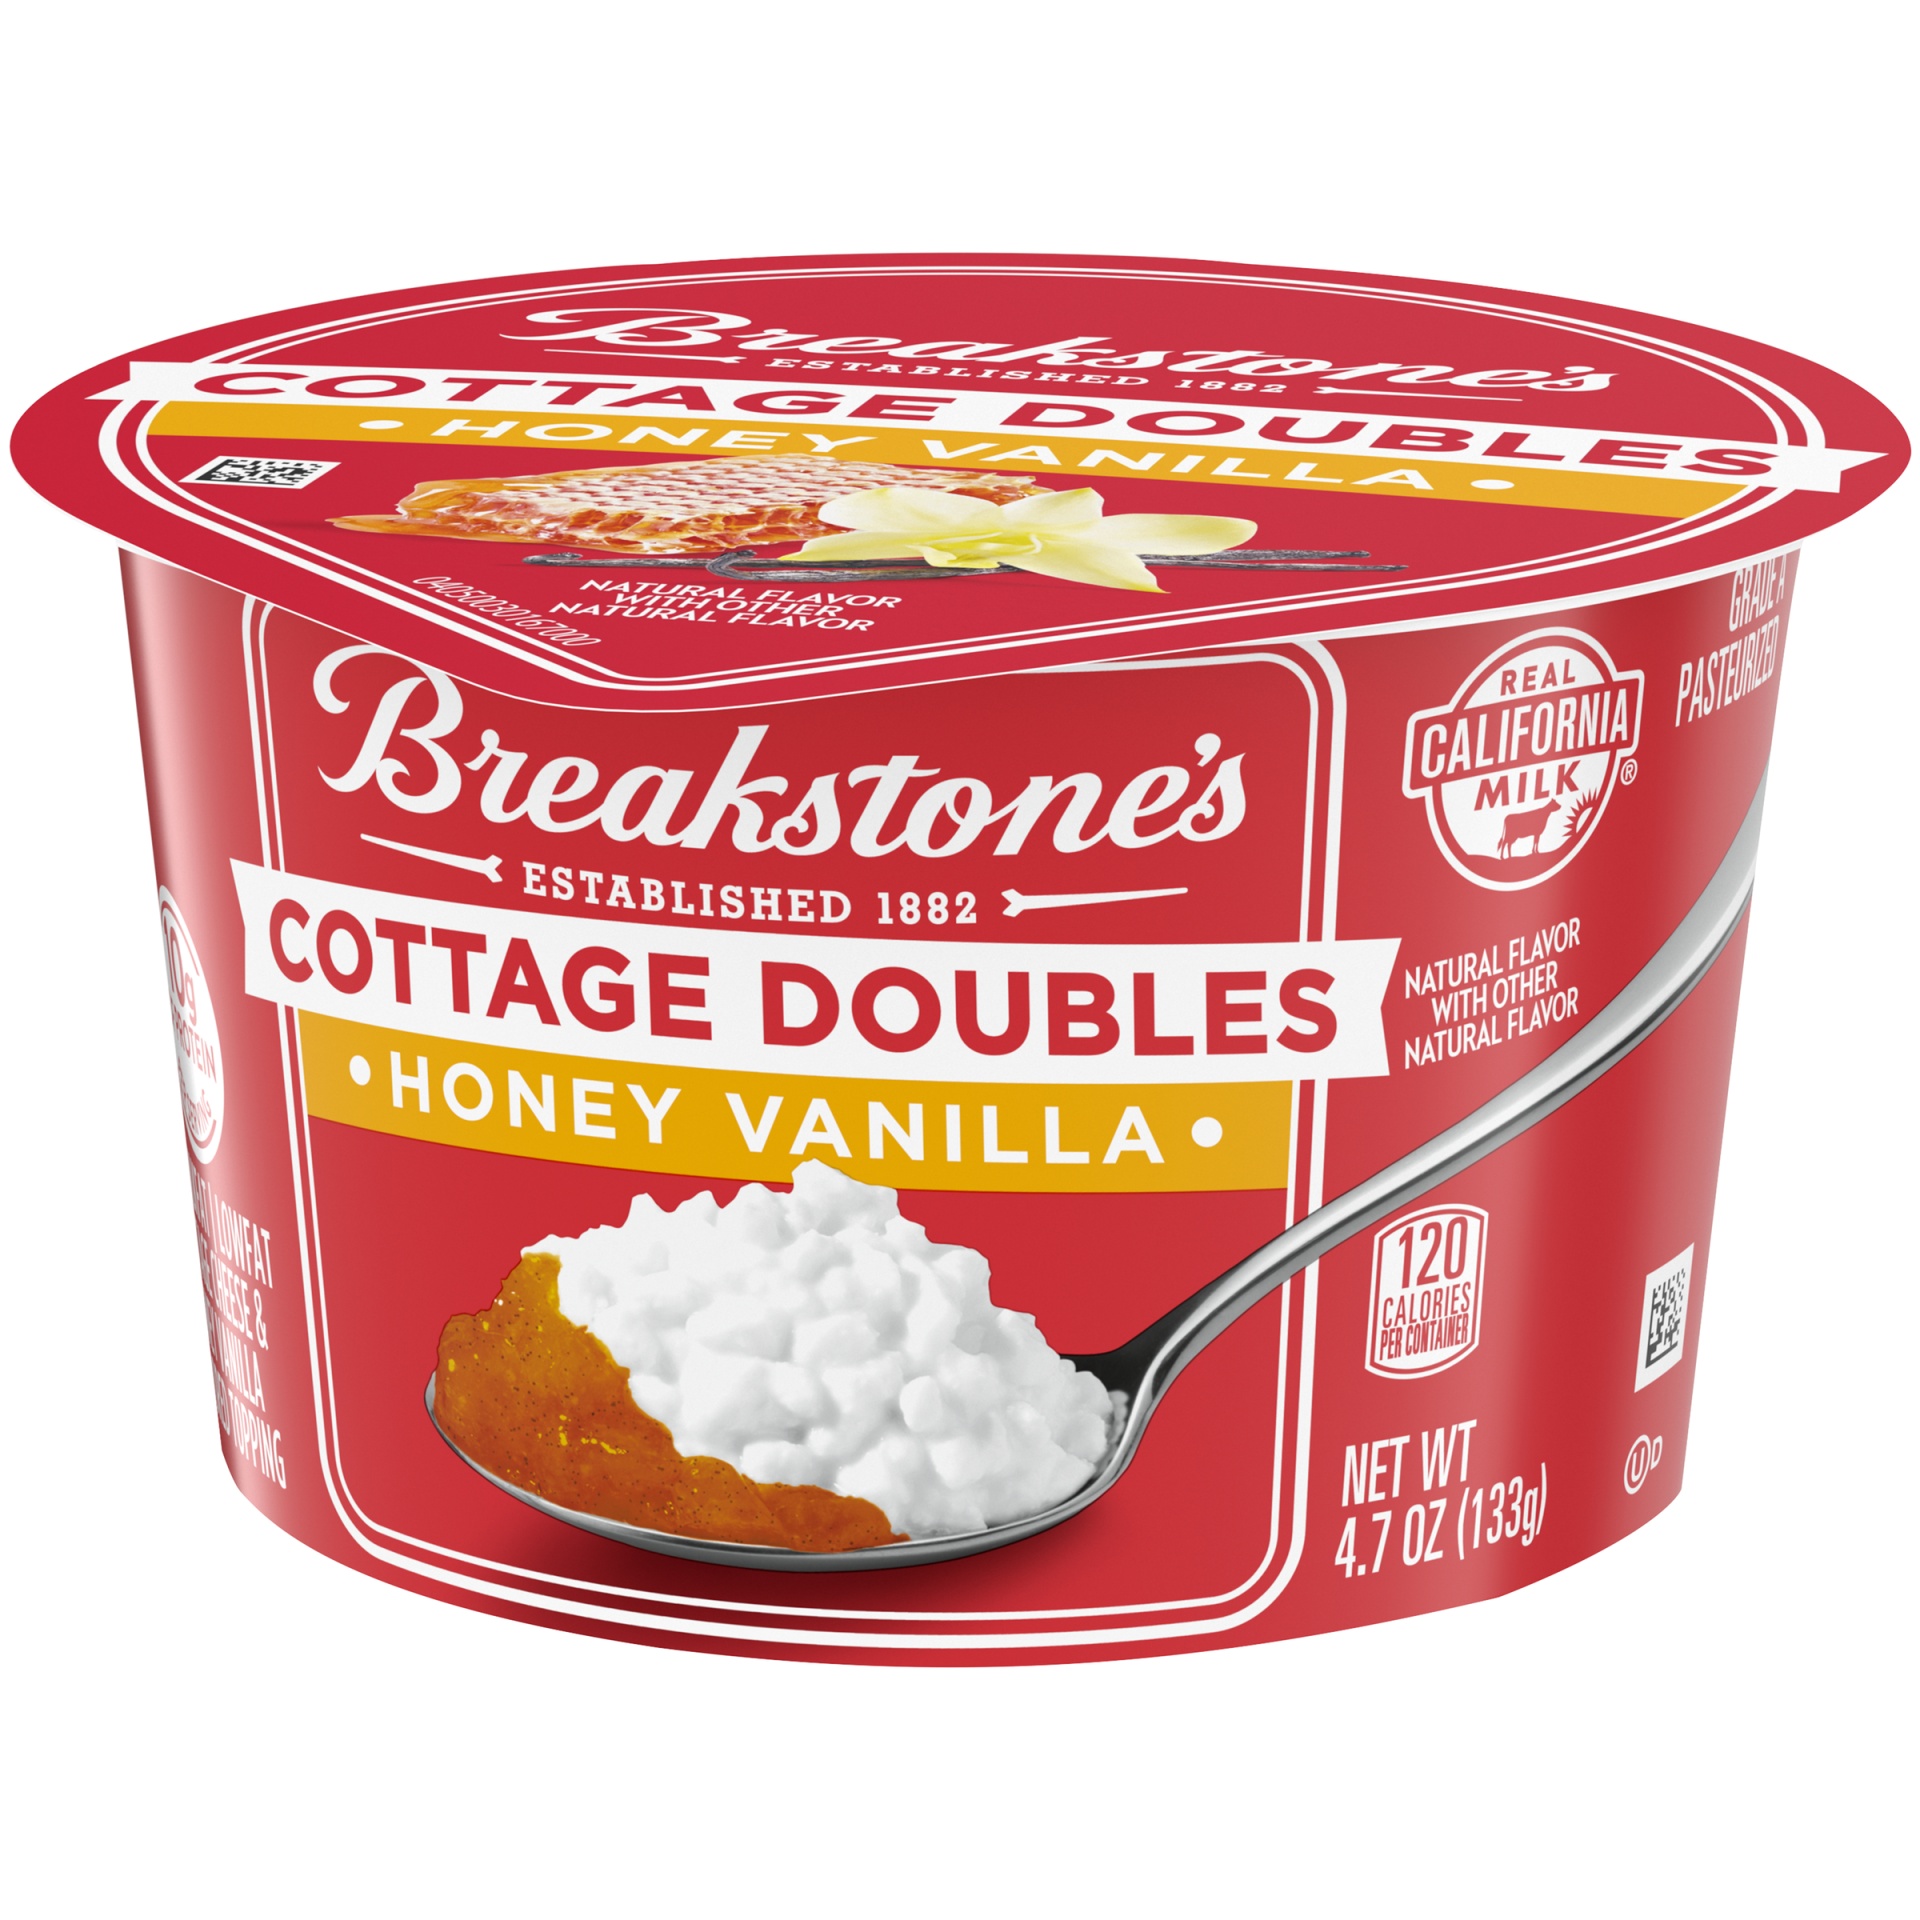 slide 3 of 6, Breakstone's Cottage Doubles Lowfat Cottage Cheese & Honey Vanilla Topping with 2% Milkfat Cup, 4.7 oz